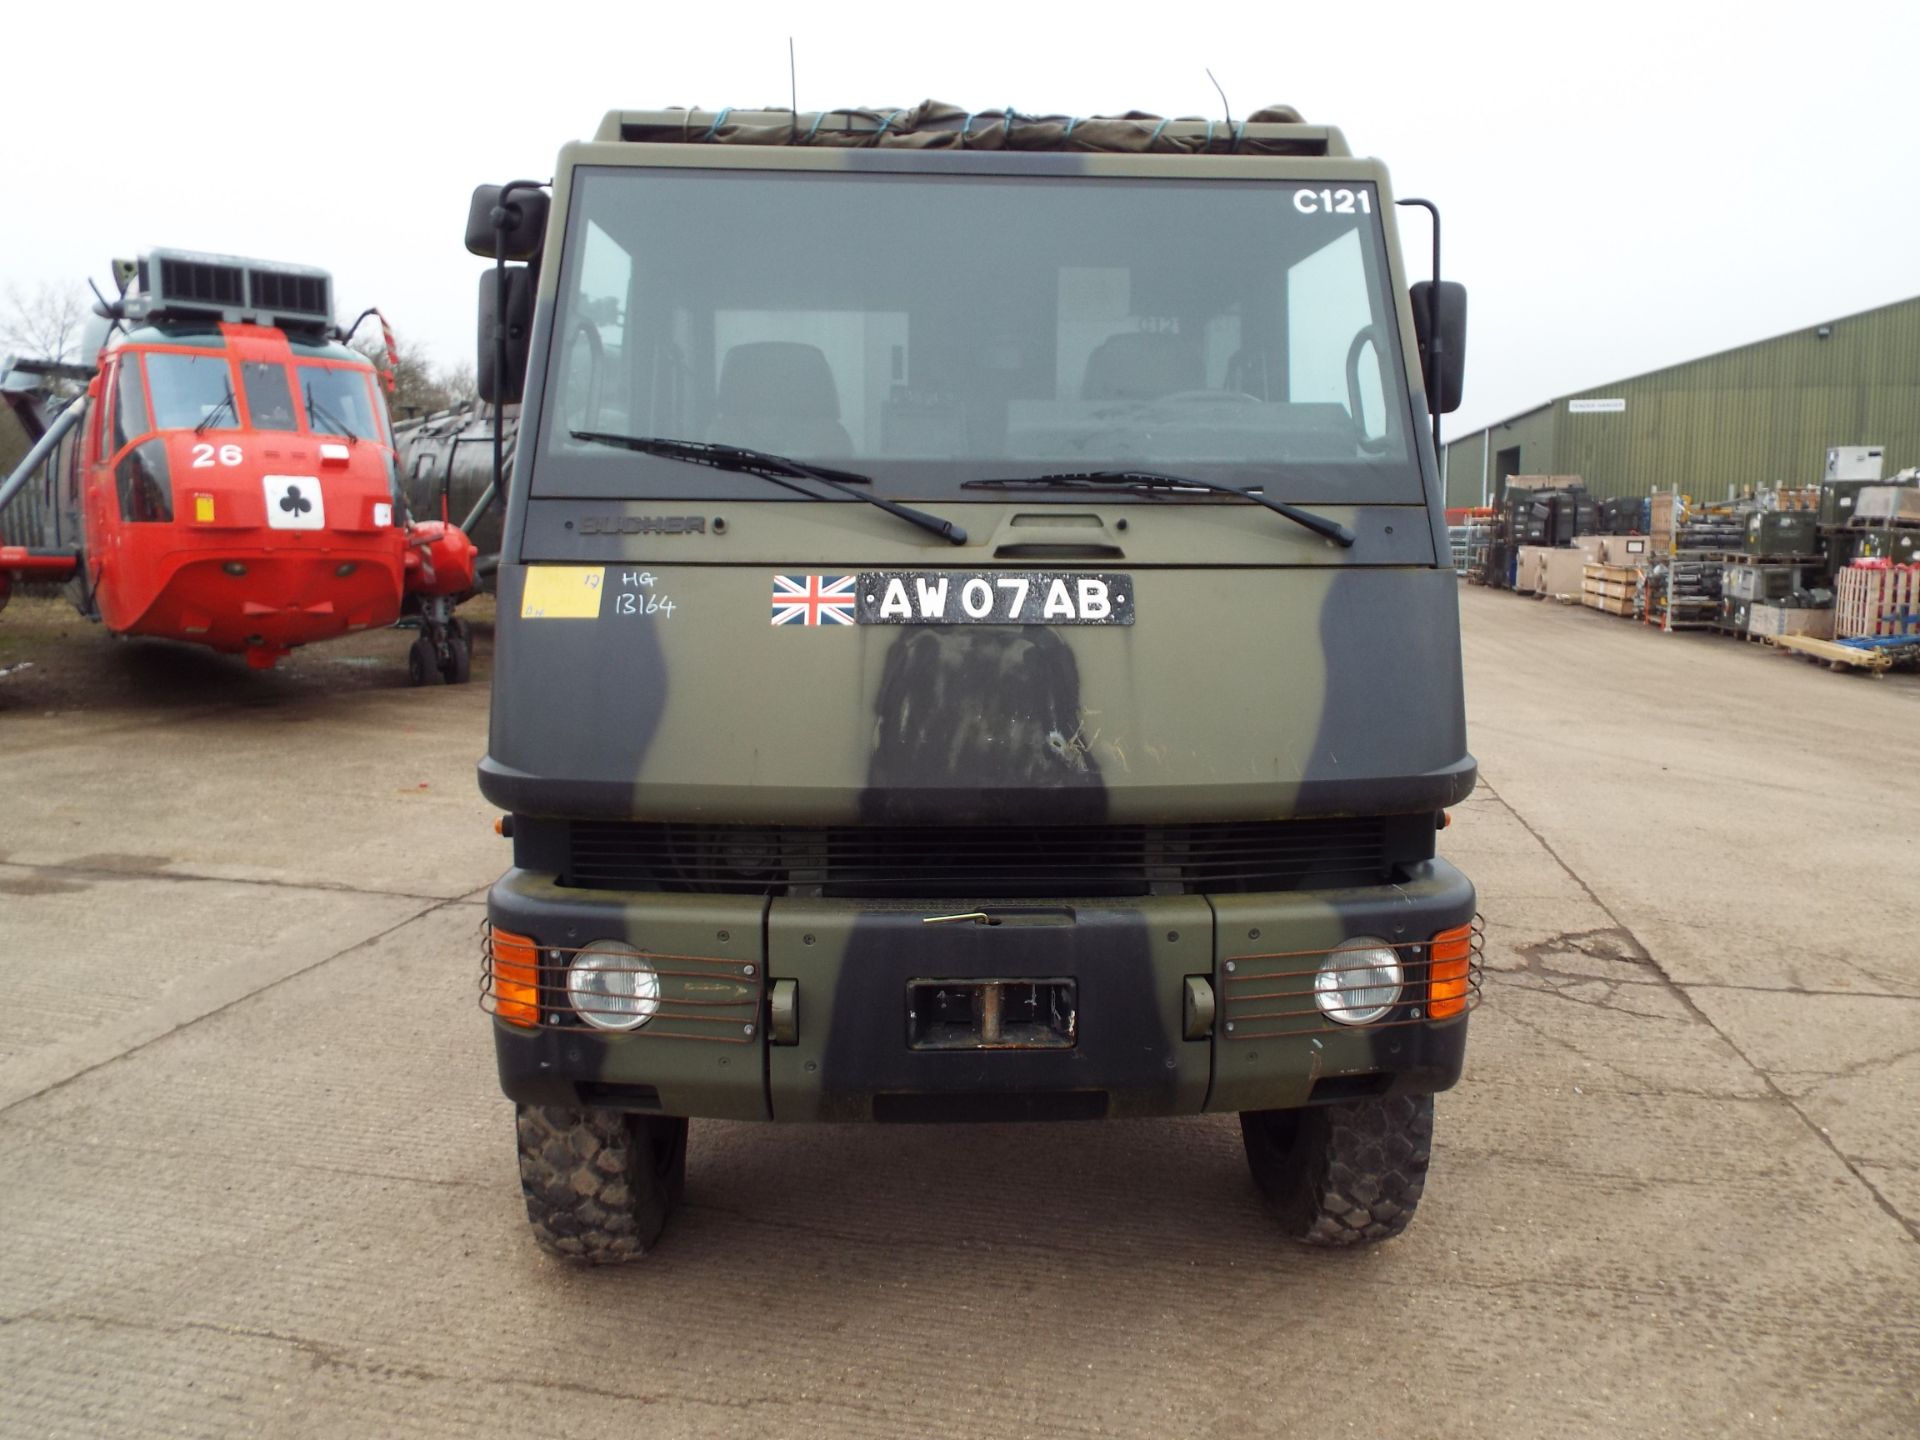 Ex Reserve Left Hand Drive Mowag Bucher Duro II 6x6 High-Mobility Tactical Vehicle - Image 2 of 31